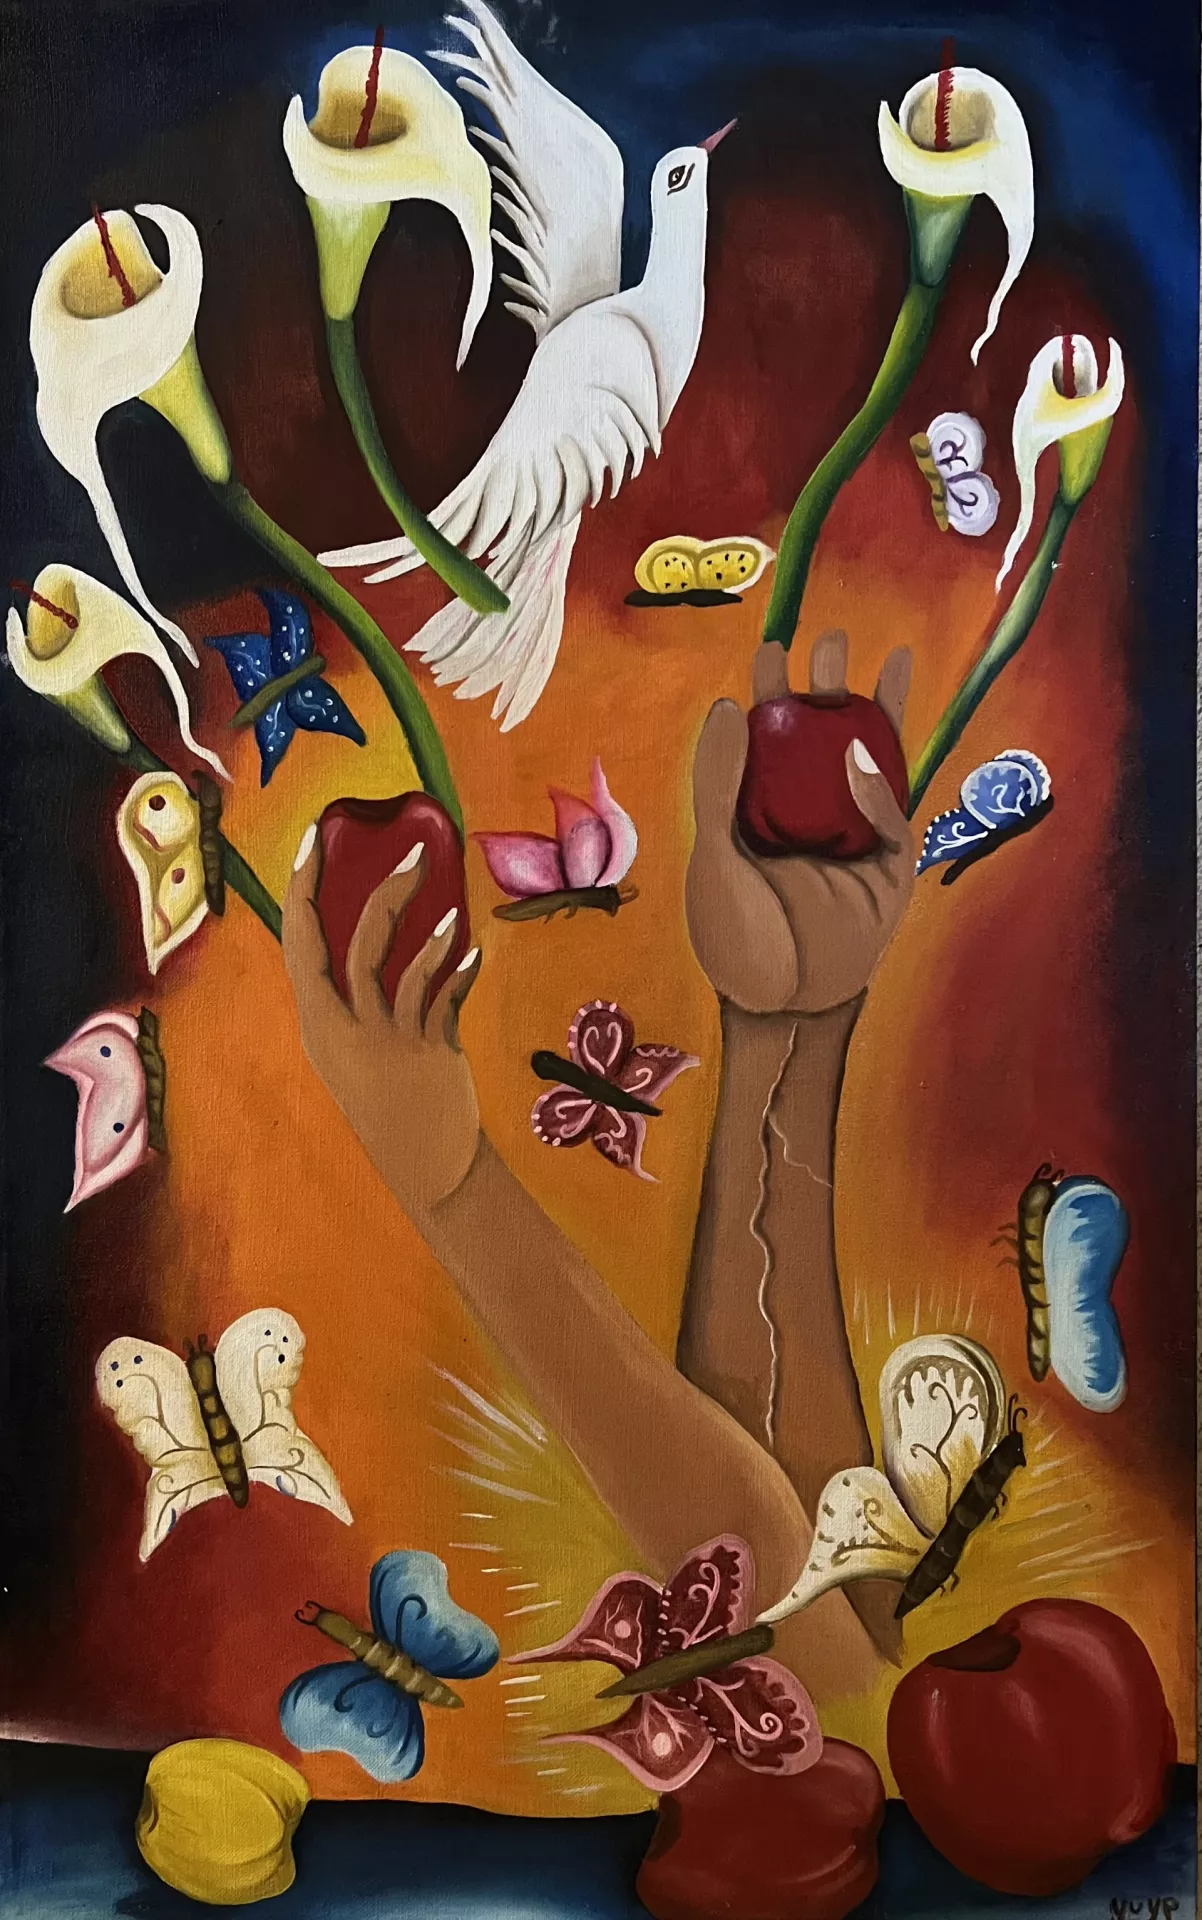 Santa Obdulia Hernandez Manos de Libertad (Hands of Liberty), 2022  Oils on canvas. Size: 20”x30”  The artist describes the piece as forgetting her limitation and becoming as free as the wind. Two brown feminine arms burst from golden rays and they are reaching up holding red apples. From behind the apples green stems become white calla lilies. A white dove flies straight up a different types of colored butterflies flutter about the scene.